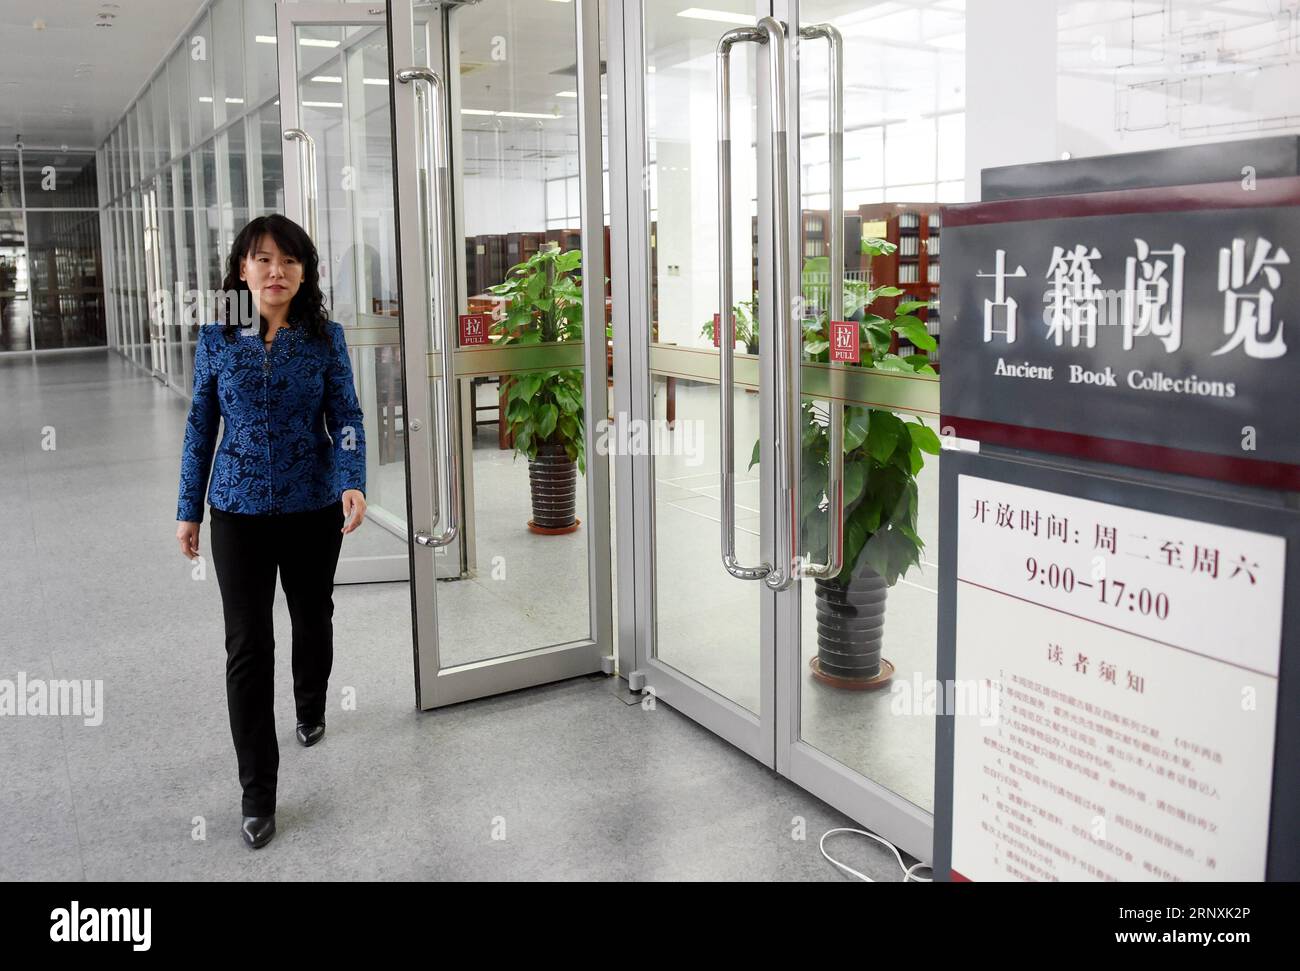 (180202) -- SHIJIAZHUANG, Feb. 2, 2018 -- Su Wenzhu walks out of a reading room of the ancient book collections at the Hebei Library in Shijiazhuang, capital of north China s Hebei Province, Nov. 22, 2017. Su Wenzhu, a delegate to the 19th National Congress of the Communist Party of China (CPC), is director of the special collection department in Hebei Library. She is dedicated to protecting ancient books and digging out traditional Chinese cultural heritages within them, in an aim to strengthen Chinese people s cultural confidence and publicize the traditional Chinese culture. ) (zwx) CHINA-H Stock Photo